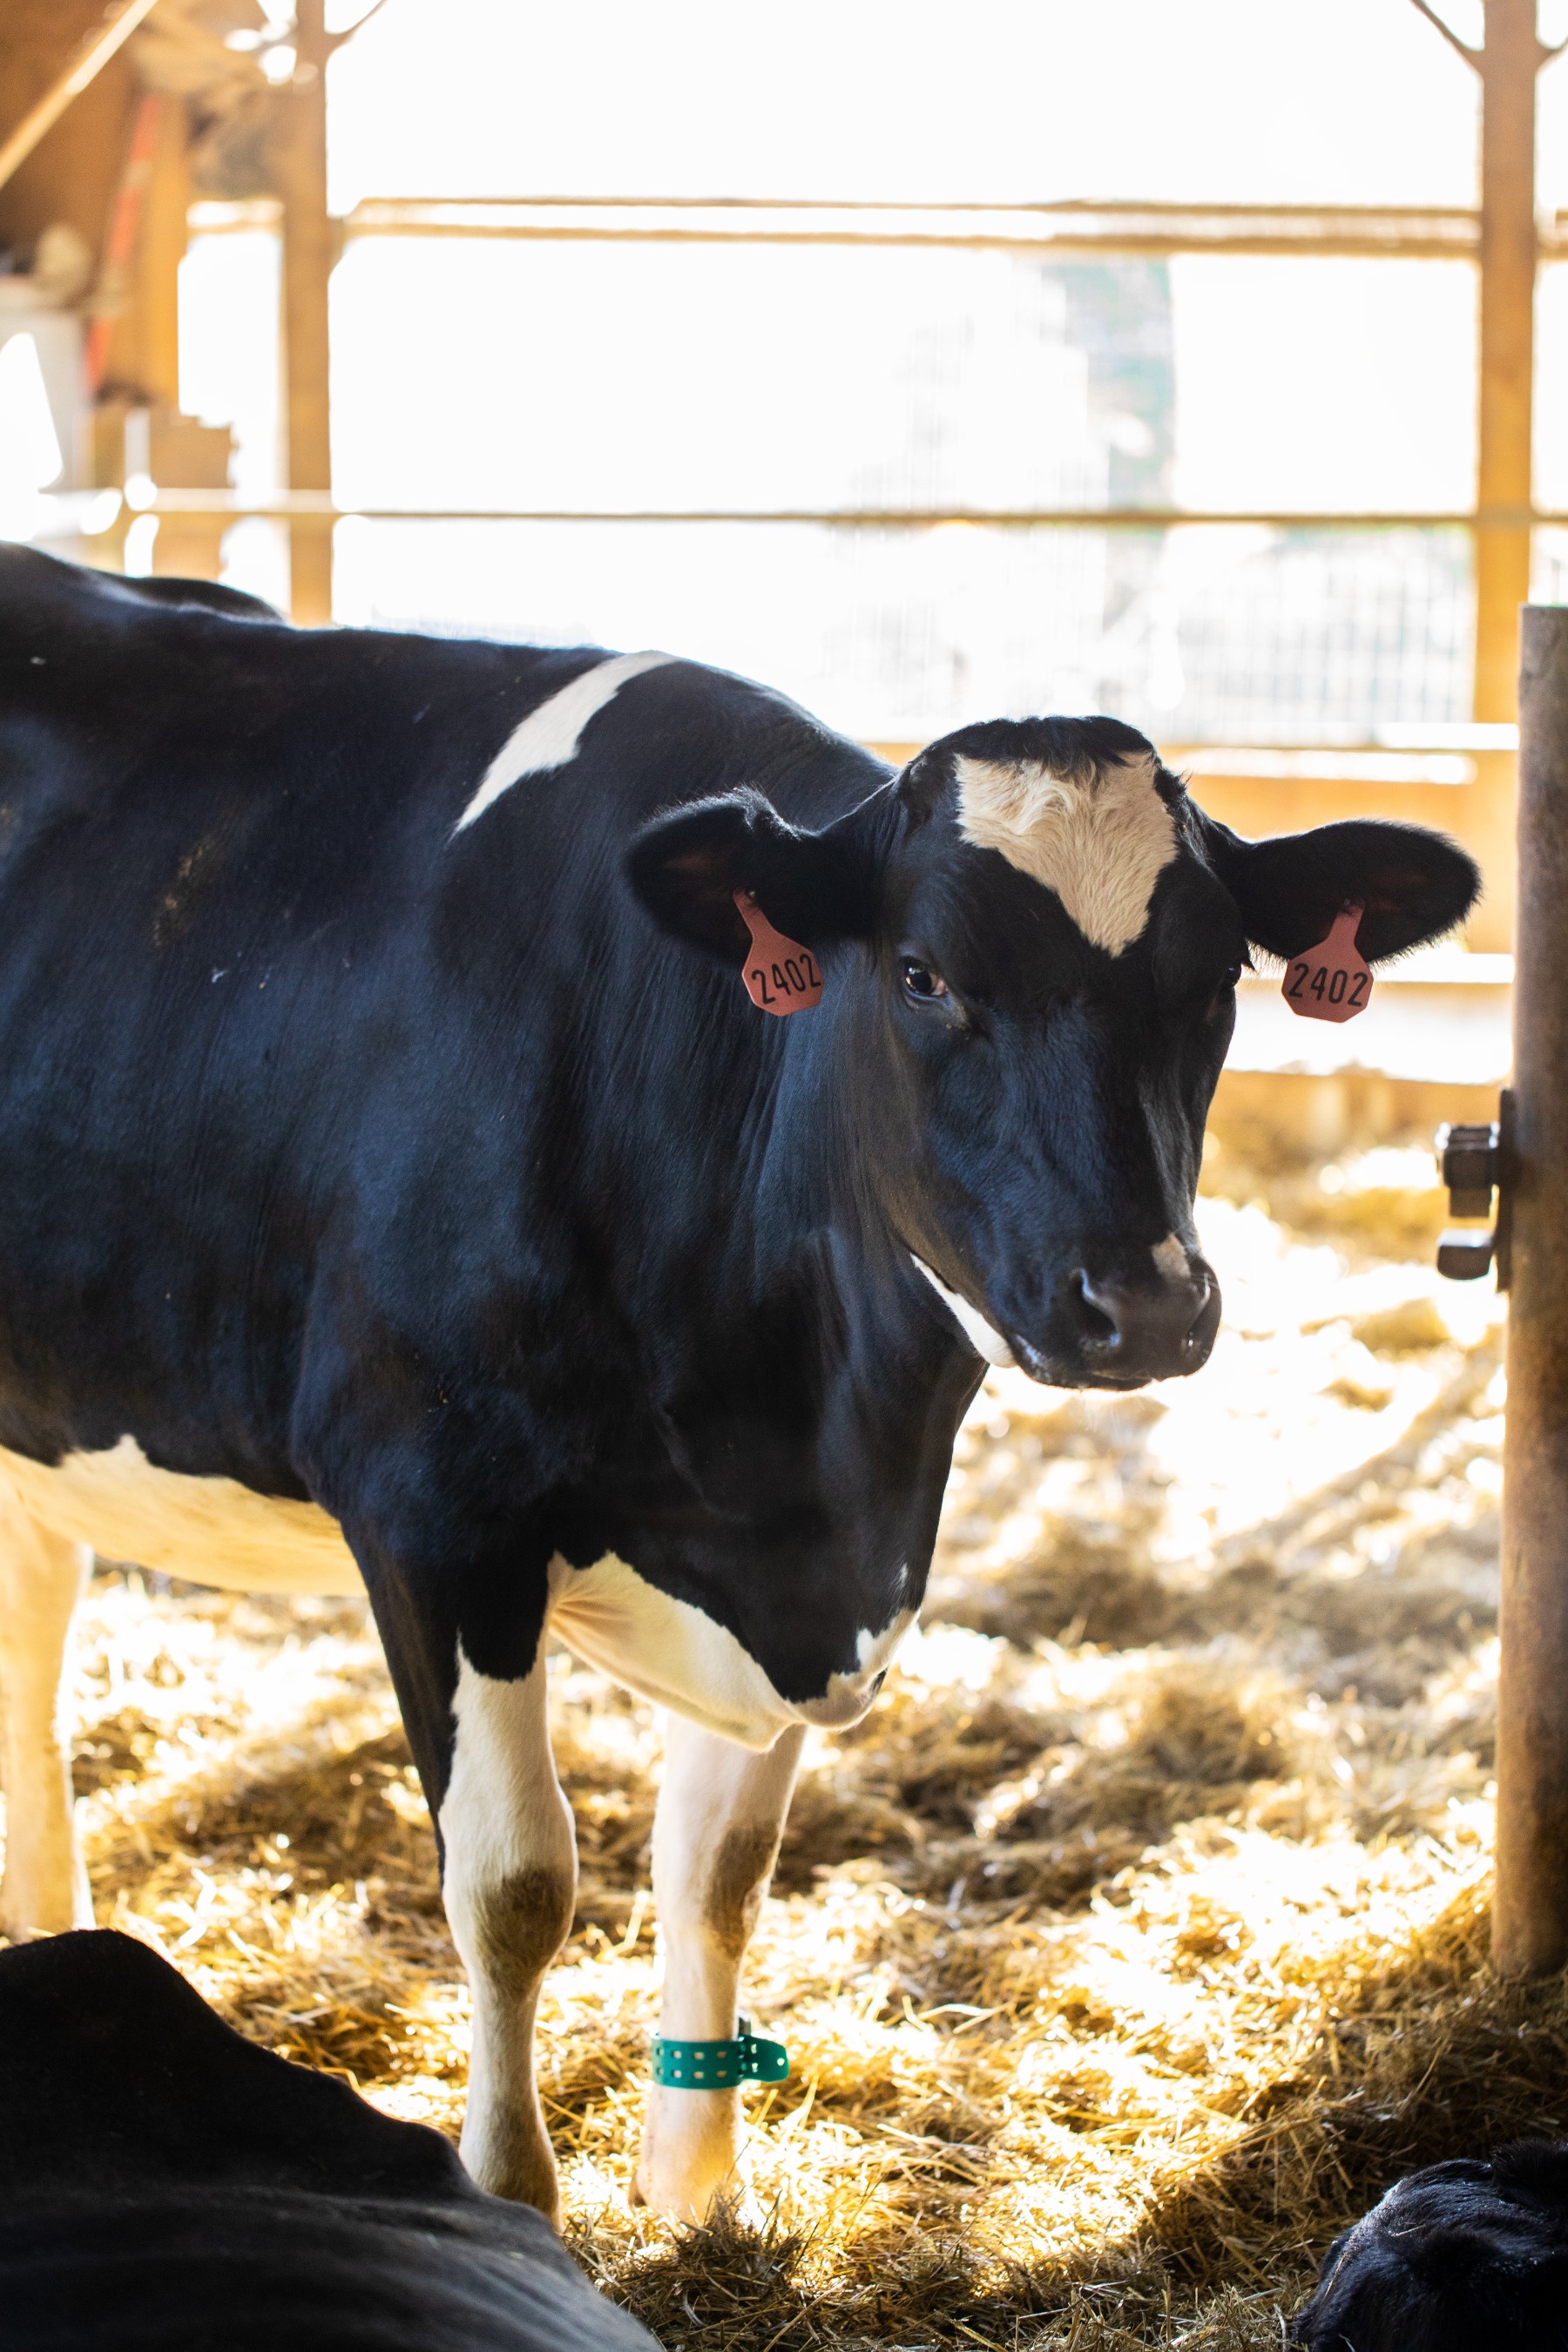 Cow burps are a major source of methane on dairy farms. Ben & Jerry’s will test the effectiveness of feed additives and a high-forage diet on reducing enteric emissions.  Photo: Ben & Jerry’s